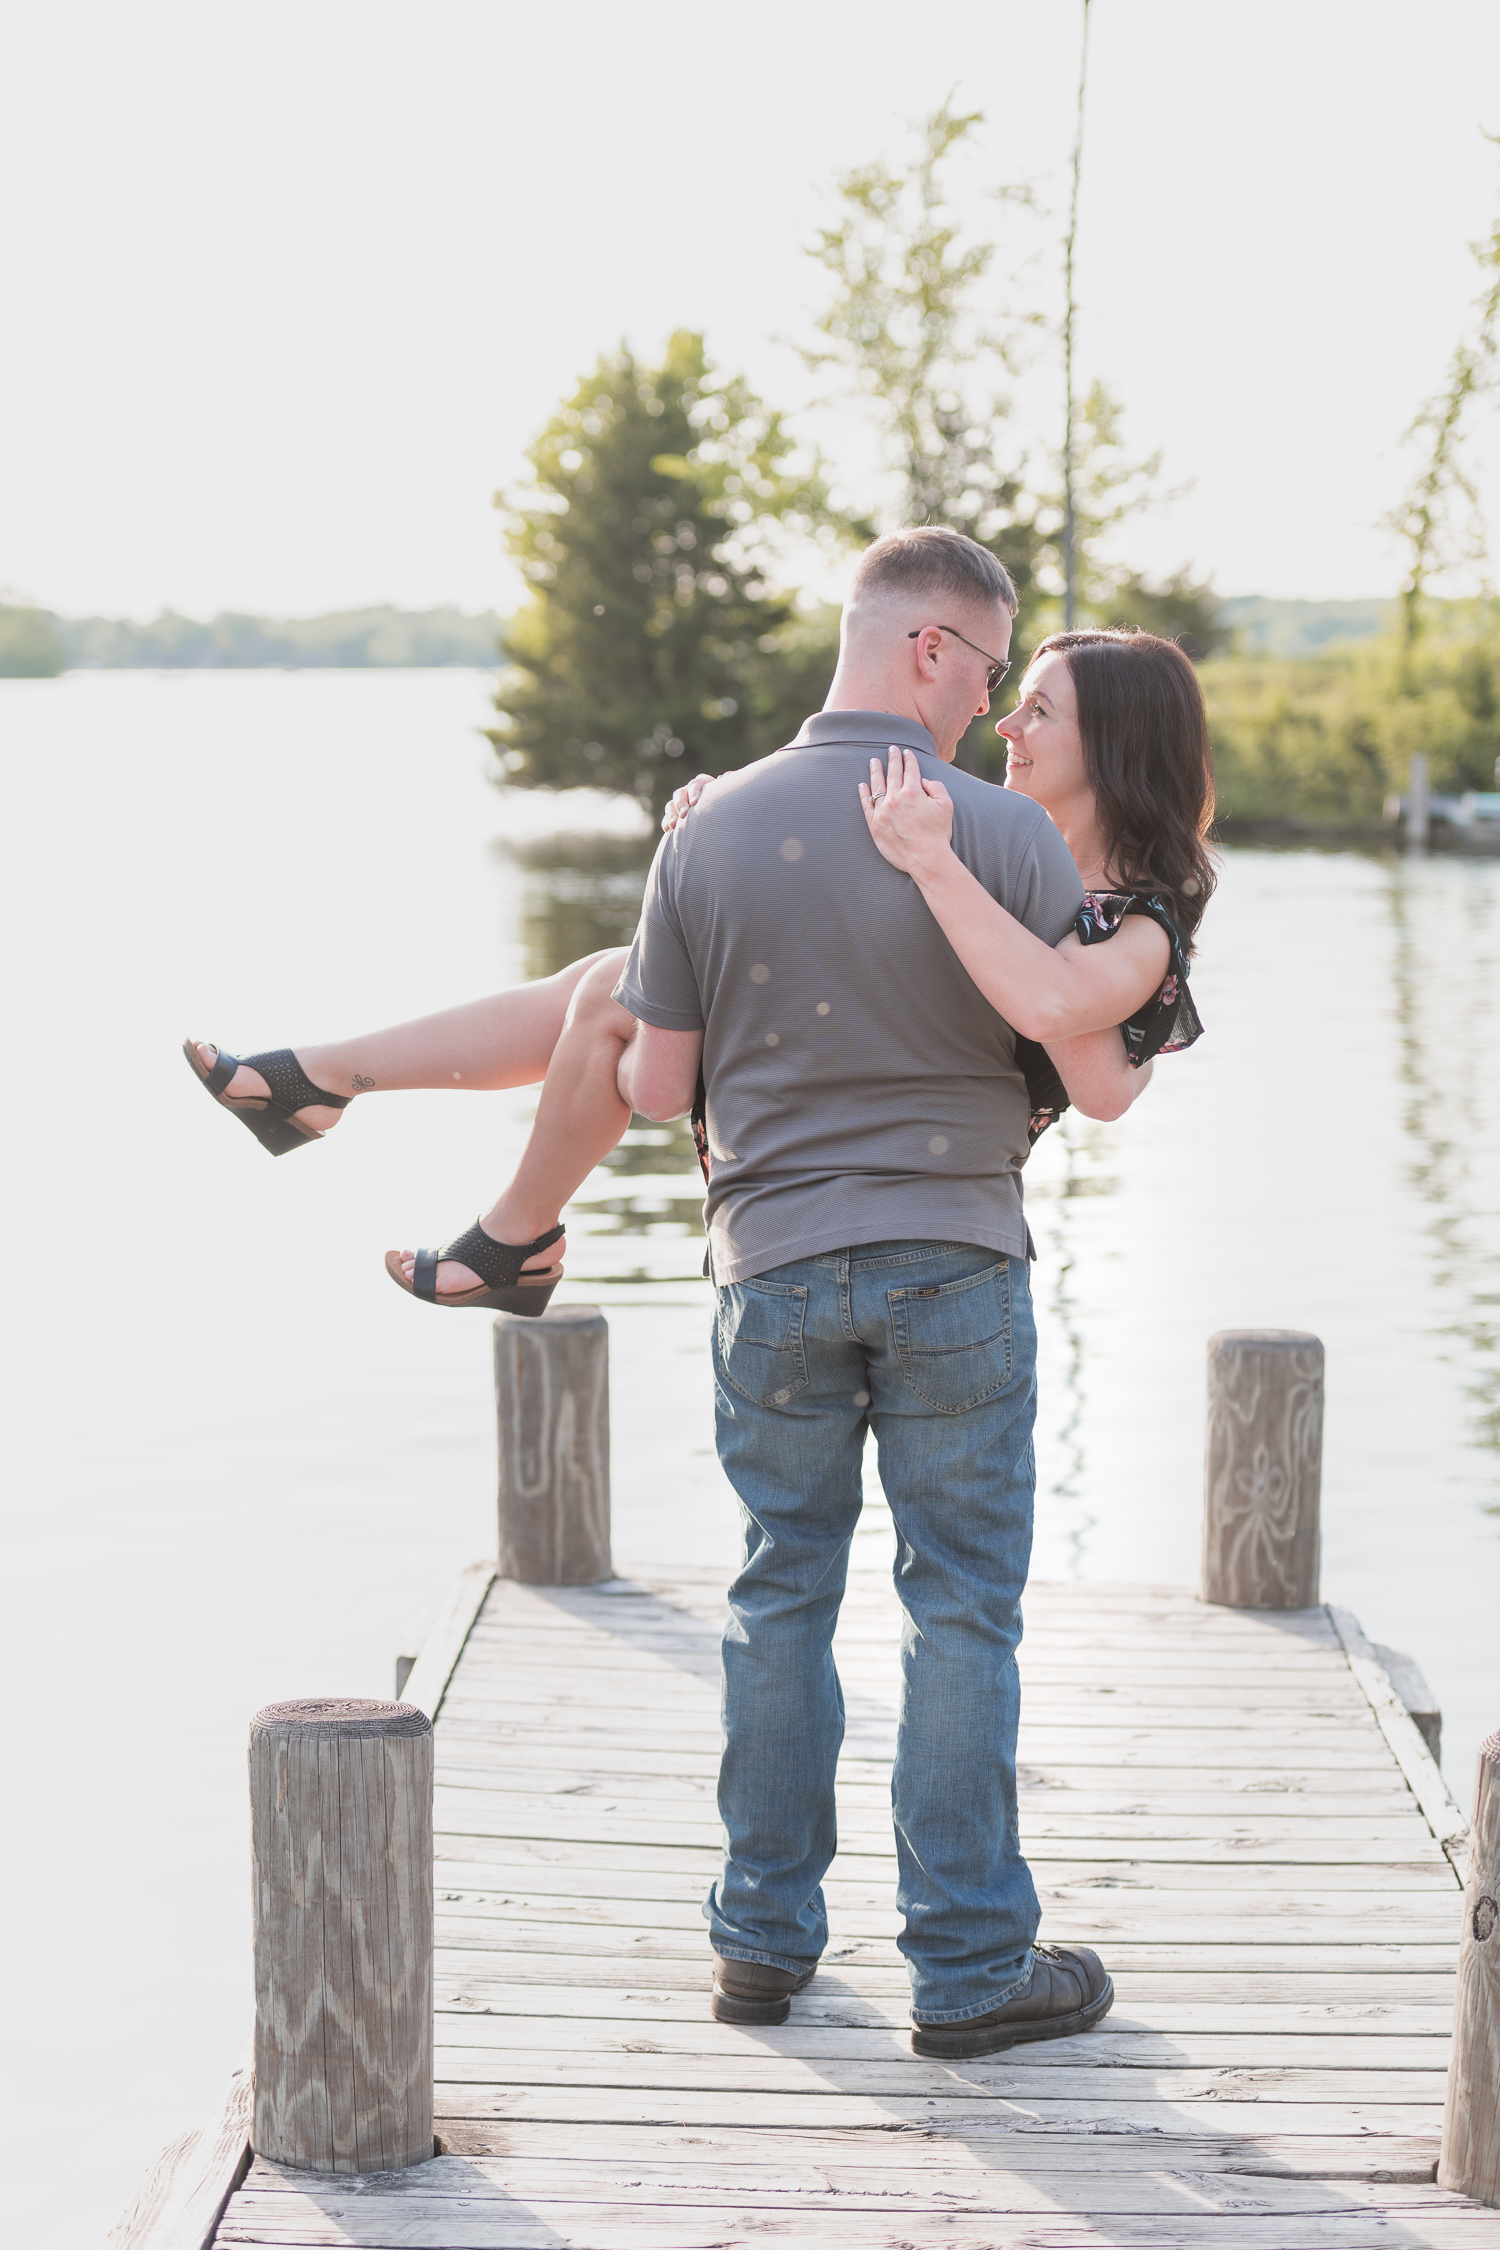 Guy lifts girl at the edge of a boat dock in Nagawaukee Park